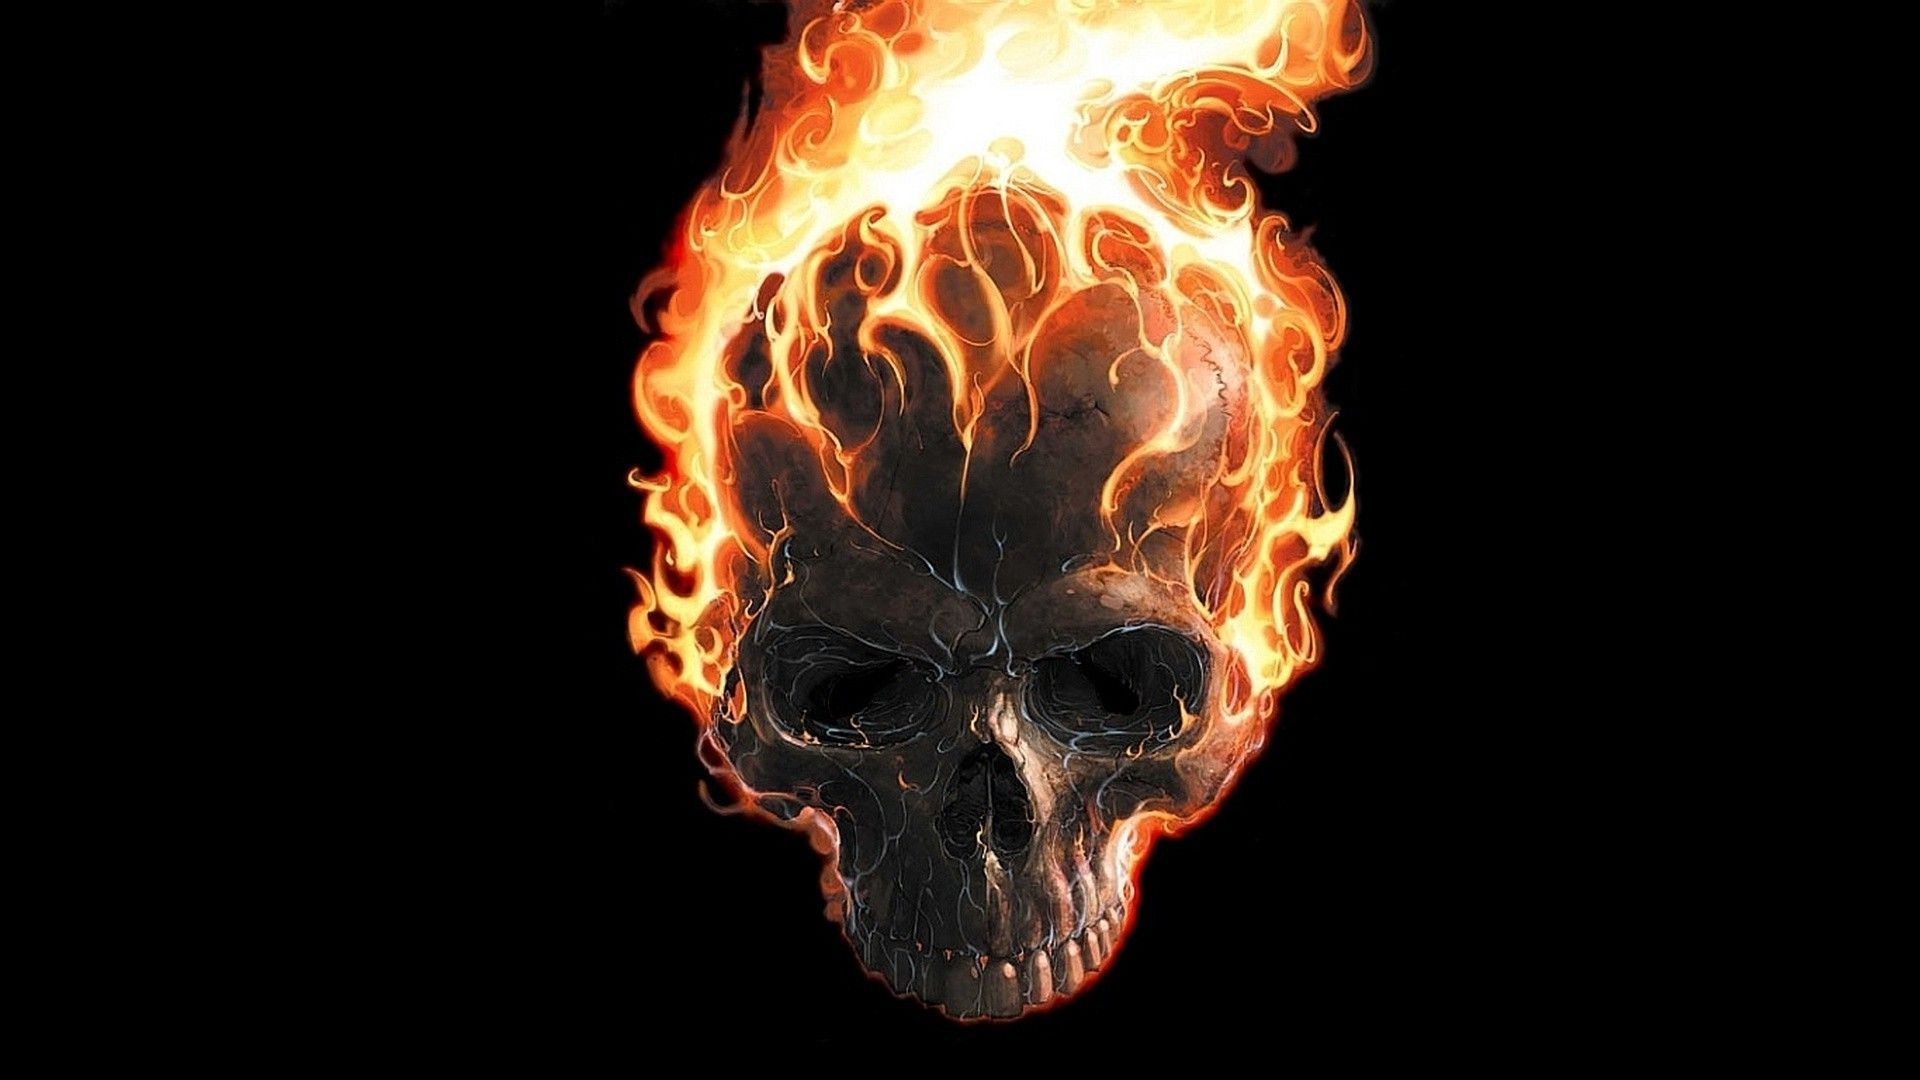 Skull On Fire Wallpaper background picture